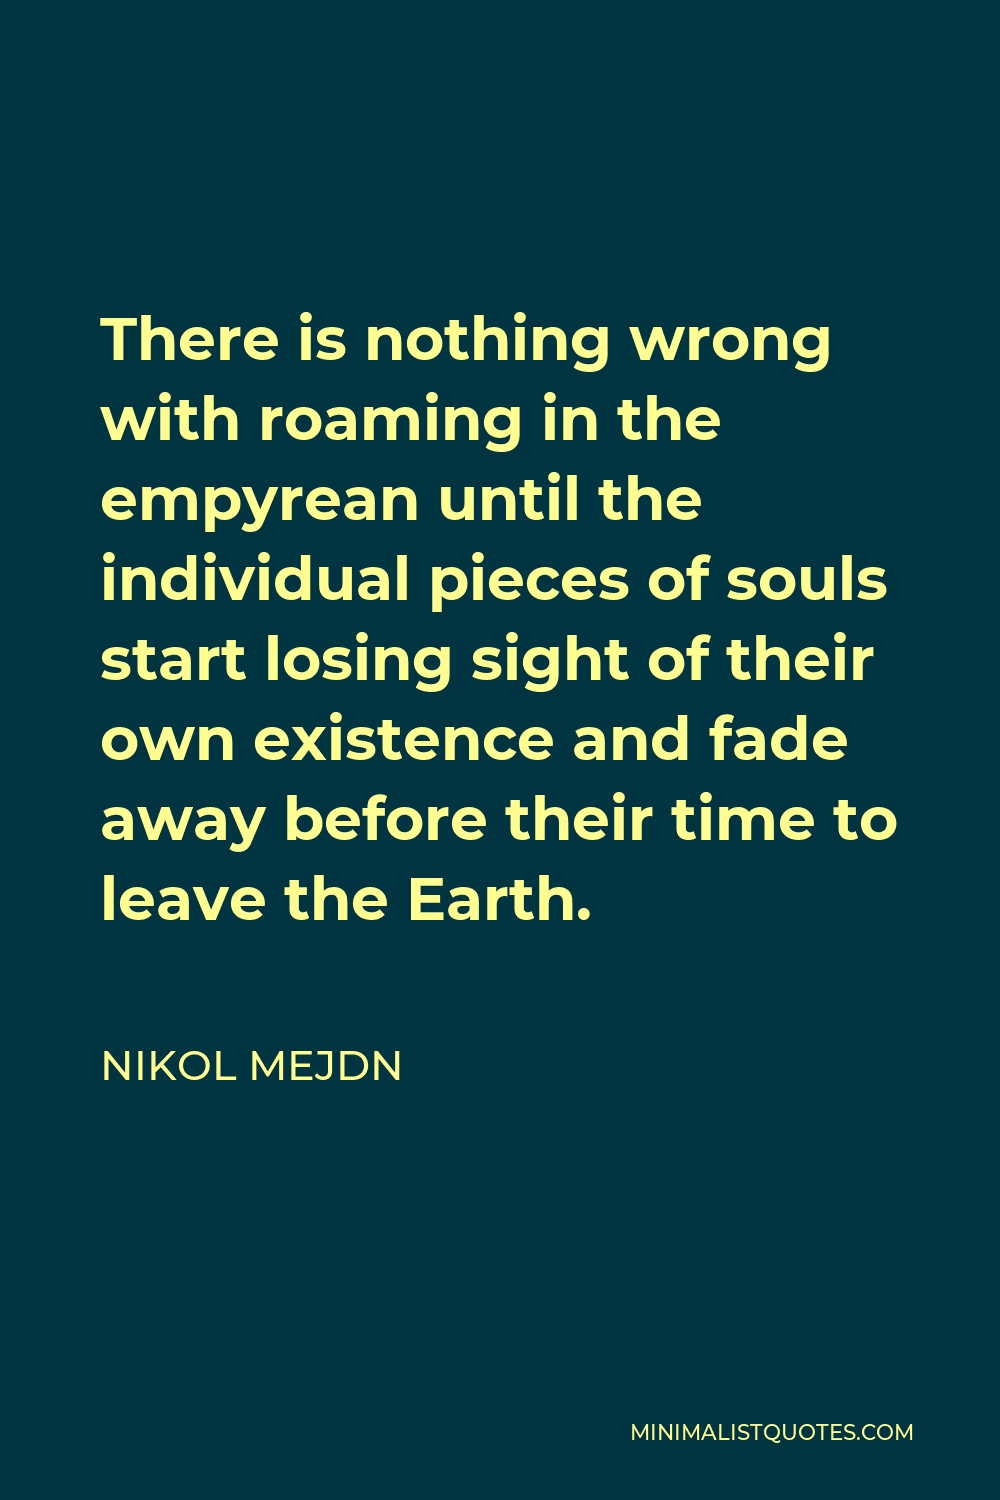 Nikol Mejdn Quote - There is nothing wrong with roaming in the empyrean until the individual pieces of souls start losing sight of their own existence and fade away before their time to leave the Earth.